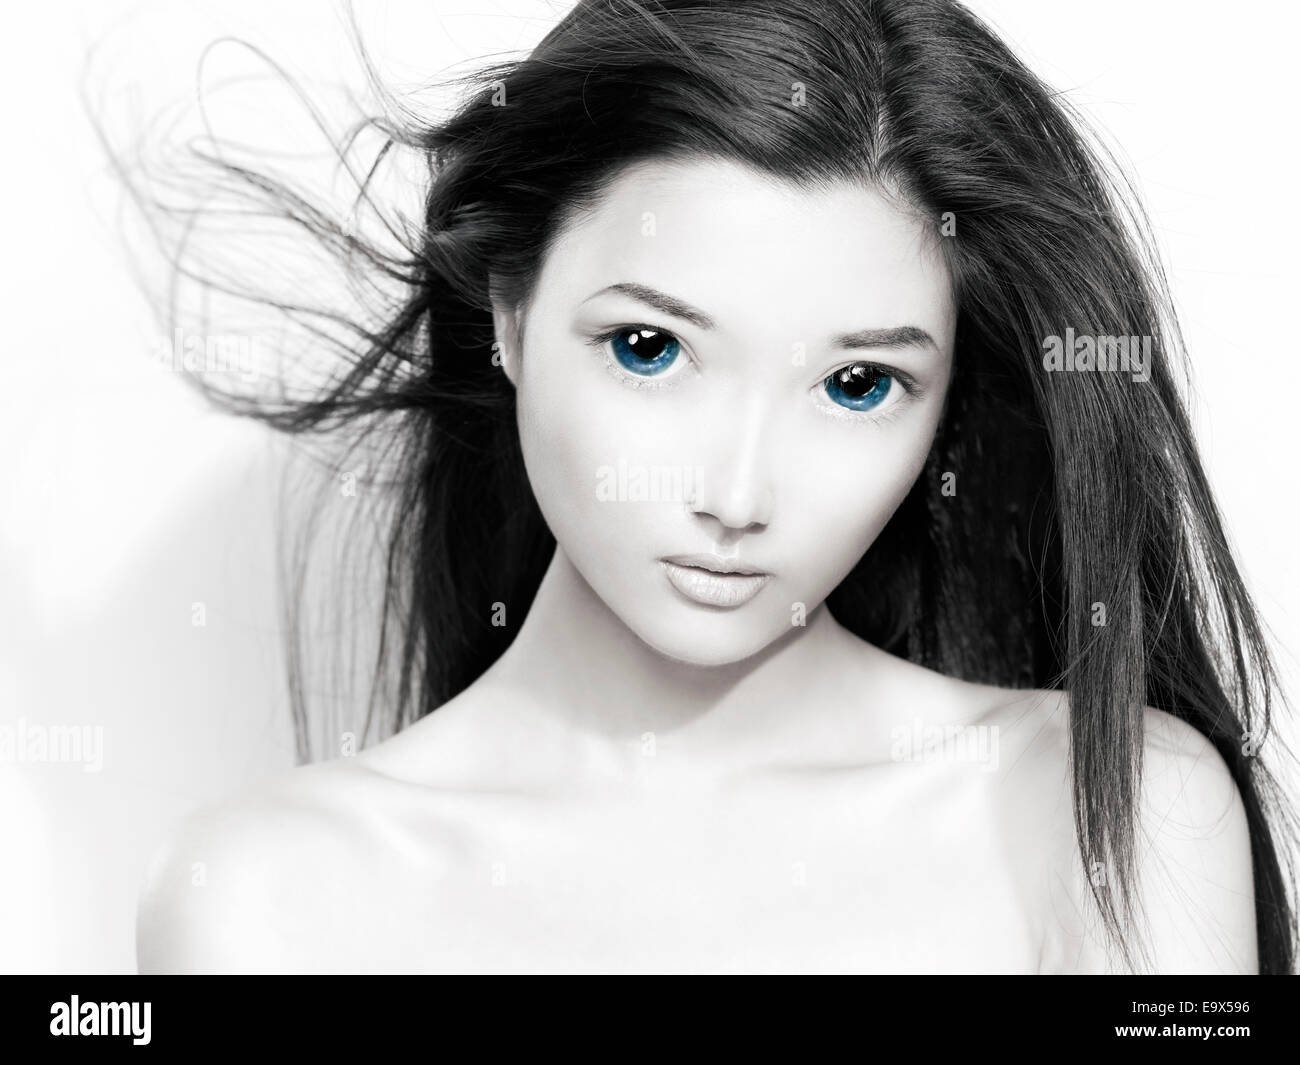 Beauty portrait of a cute young Japanese woman anime face with big blue eyes and flying hair. Black and white with blue color. Stock Photo